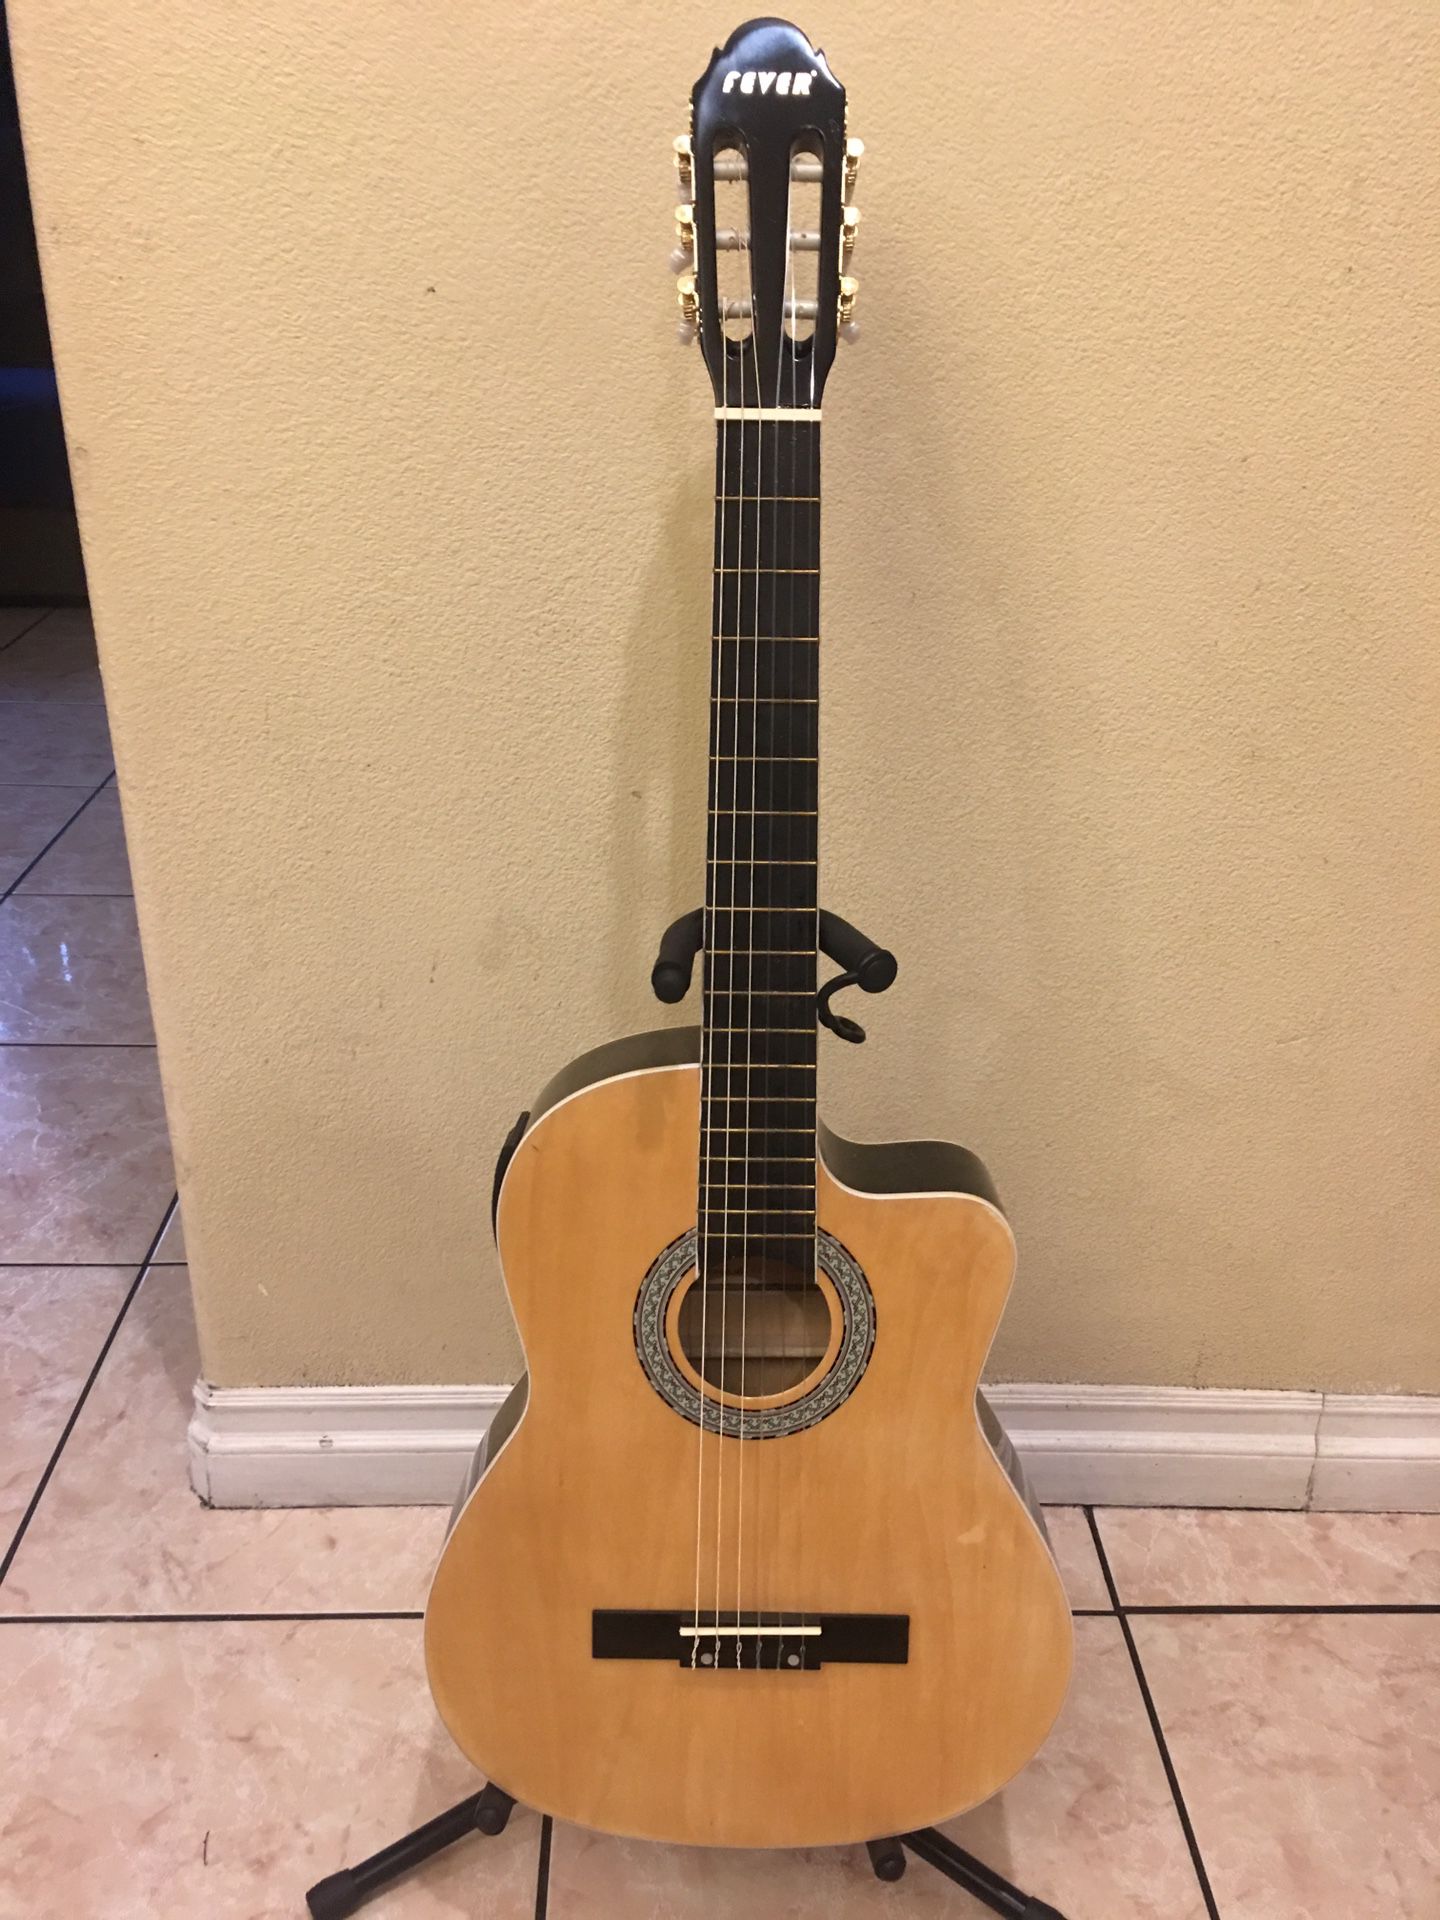 Fever classic electric acoustic guitar